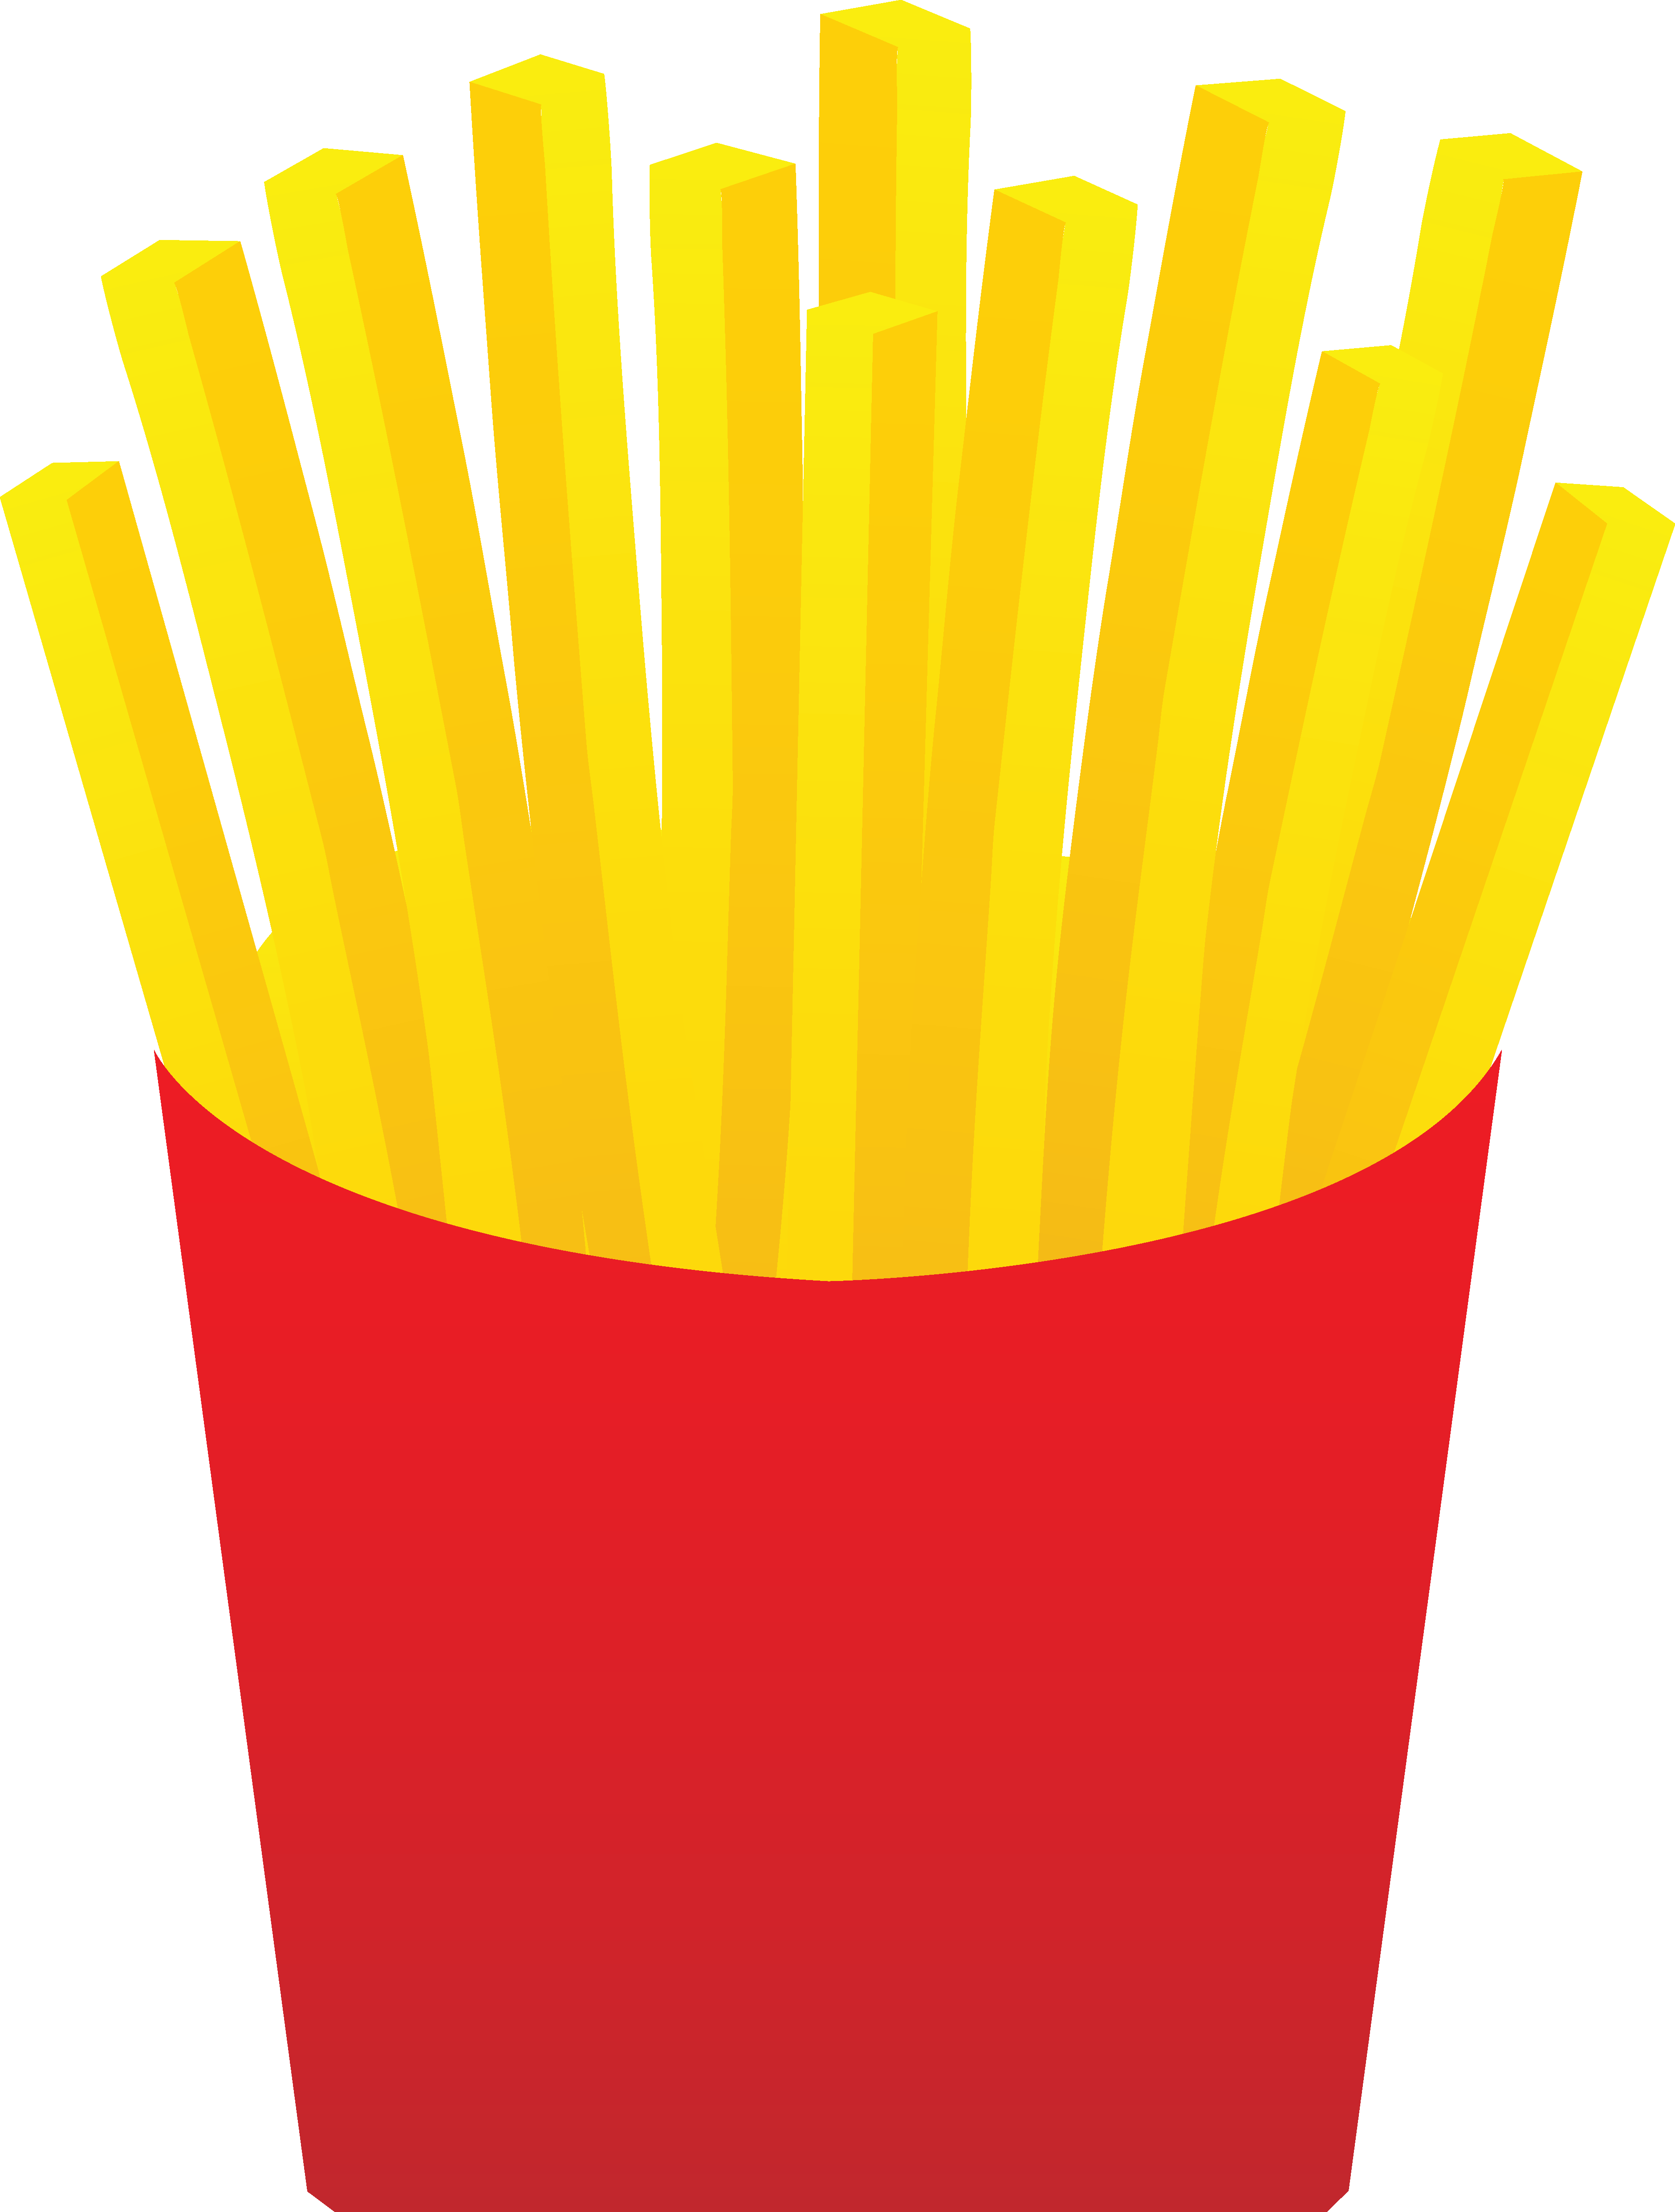 French Fry Clipart #1 - French Fry Clip Art